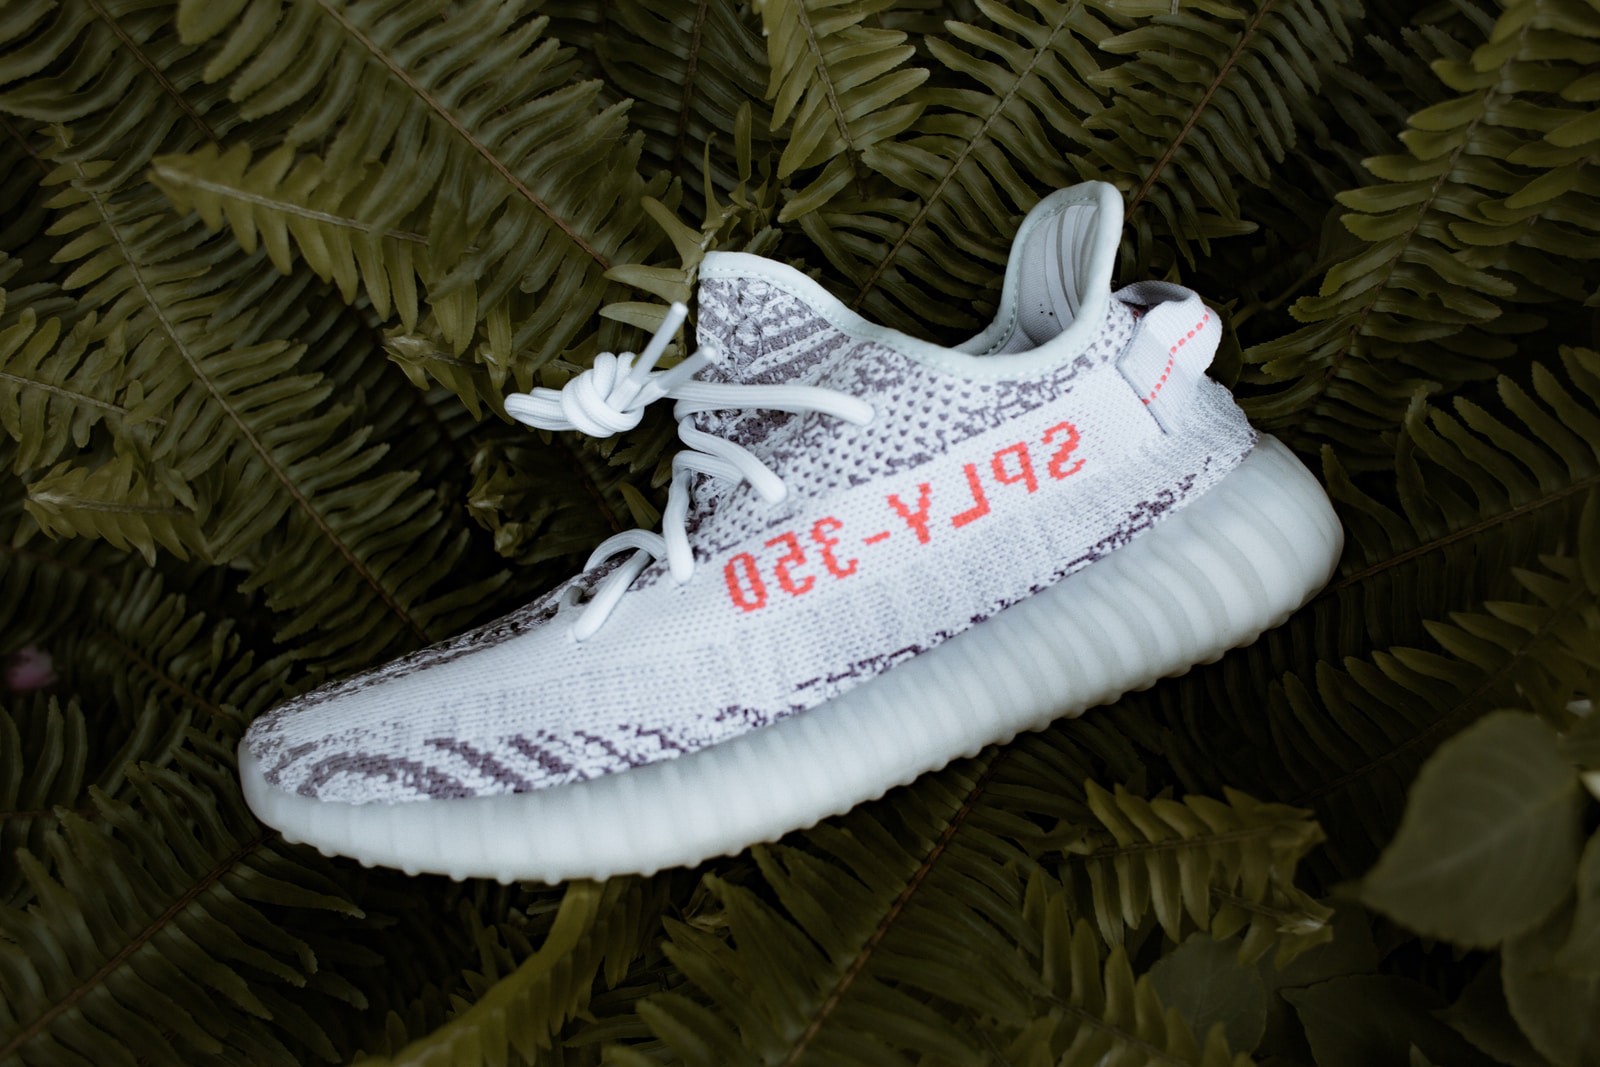 white and black adidas Yeezy Boost SPLY 350 V2 shoe